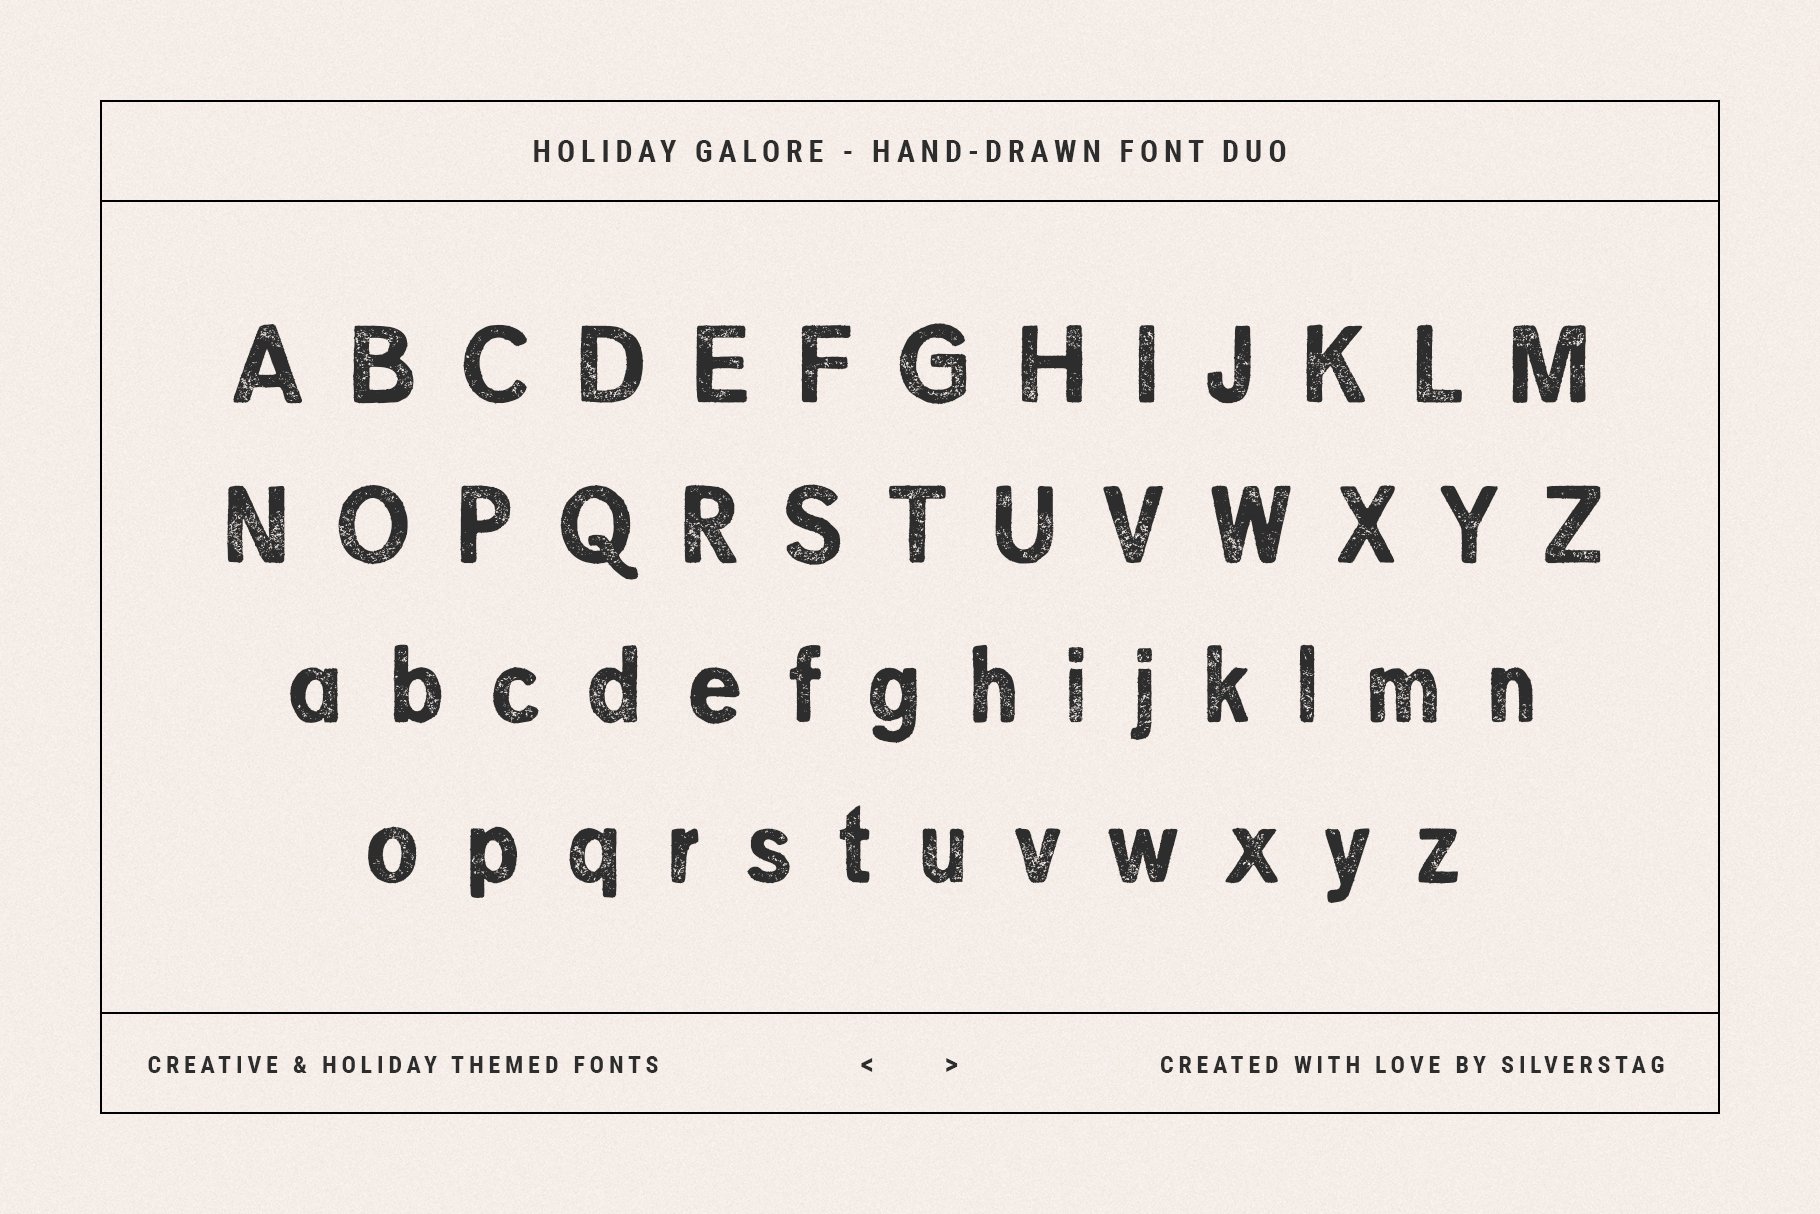 31 holiday galore font duo by silver stag 50